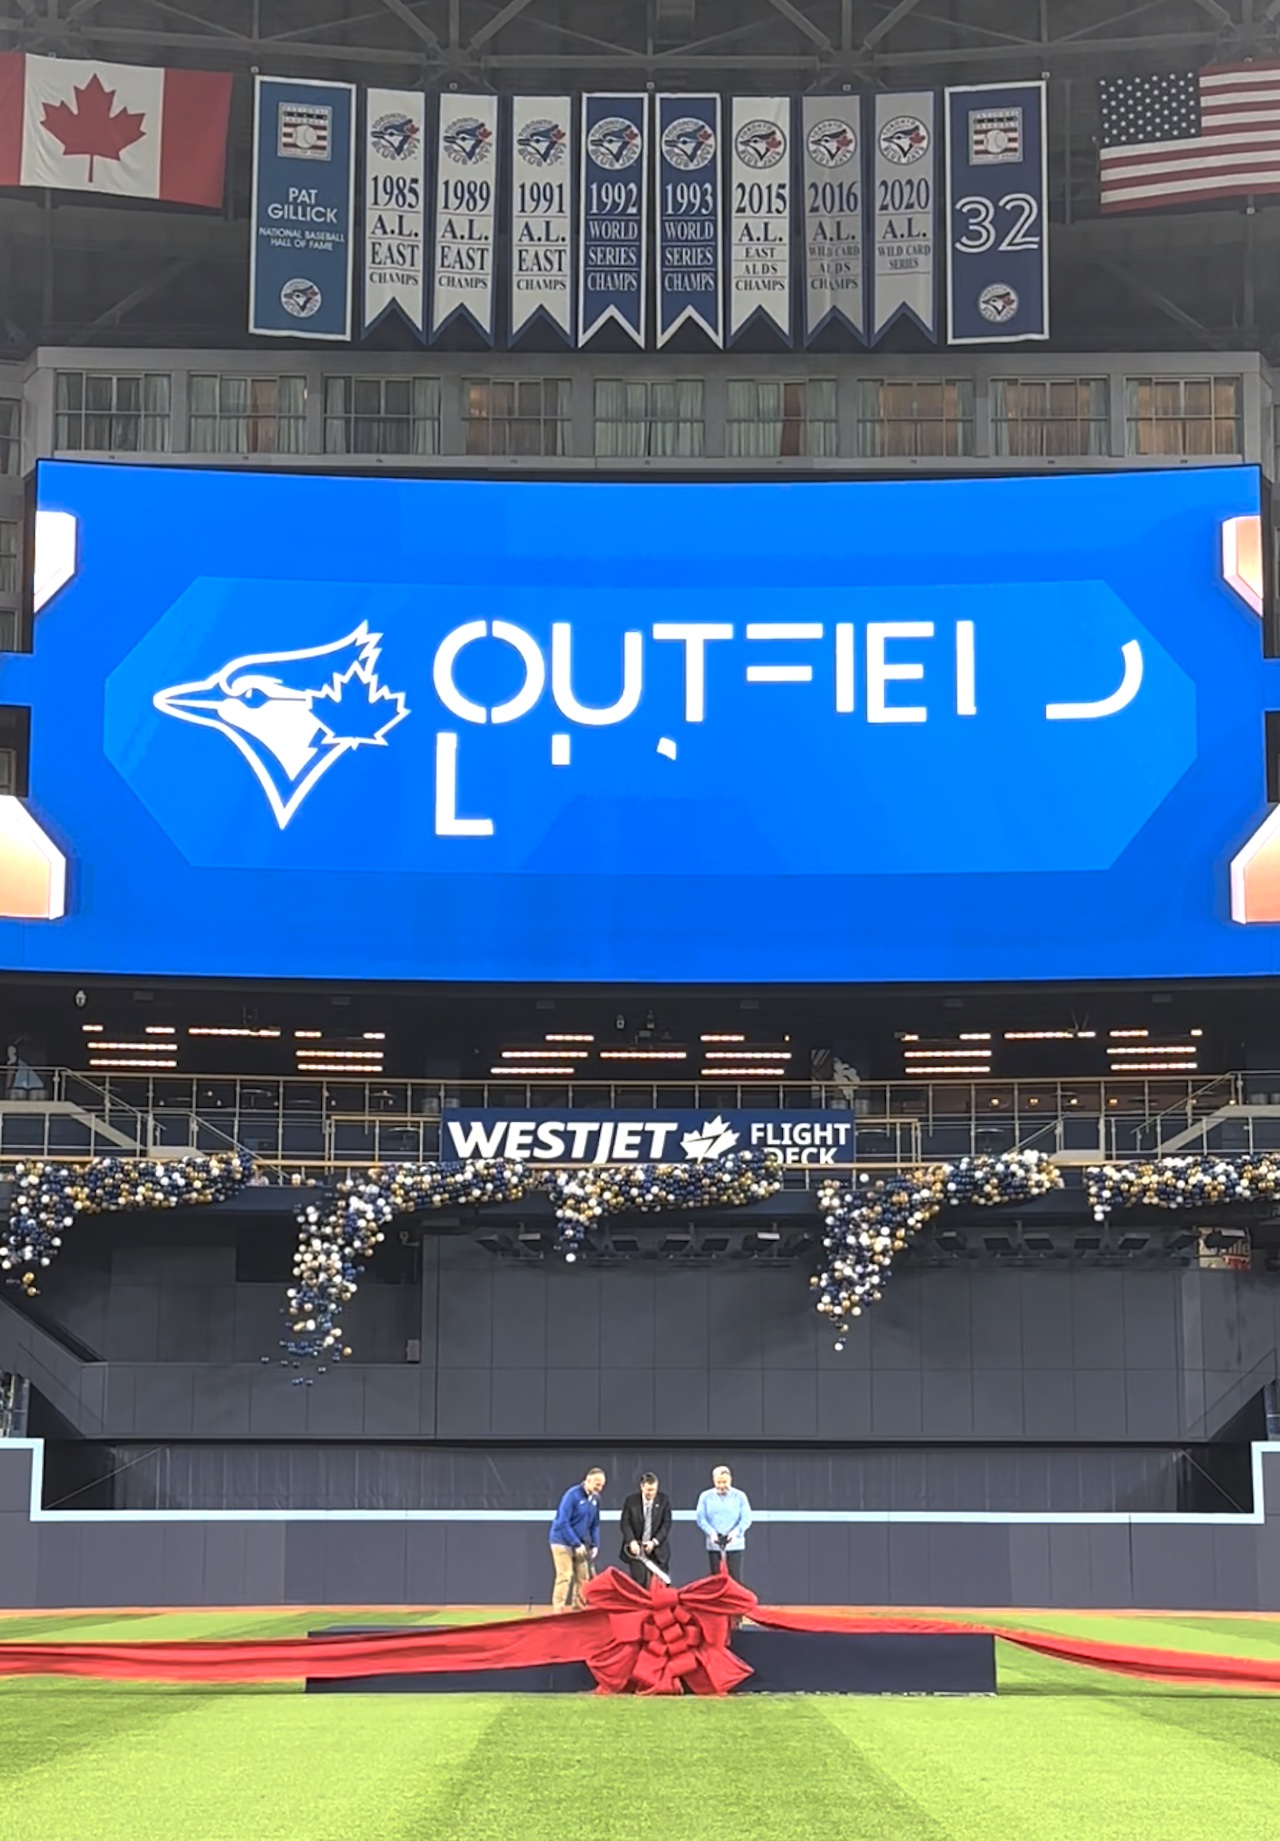 Rogers Centre renovations wow Jays fans at home opener